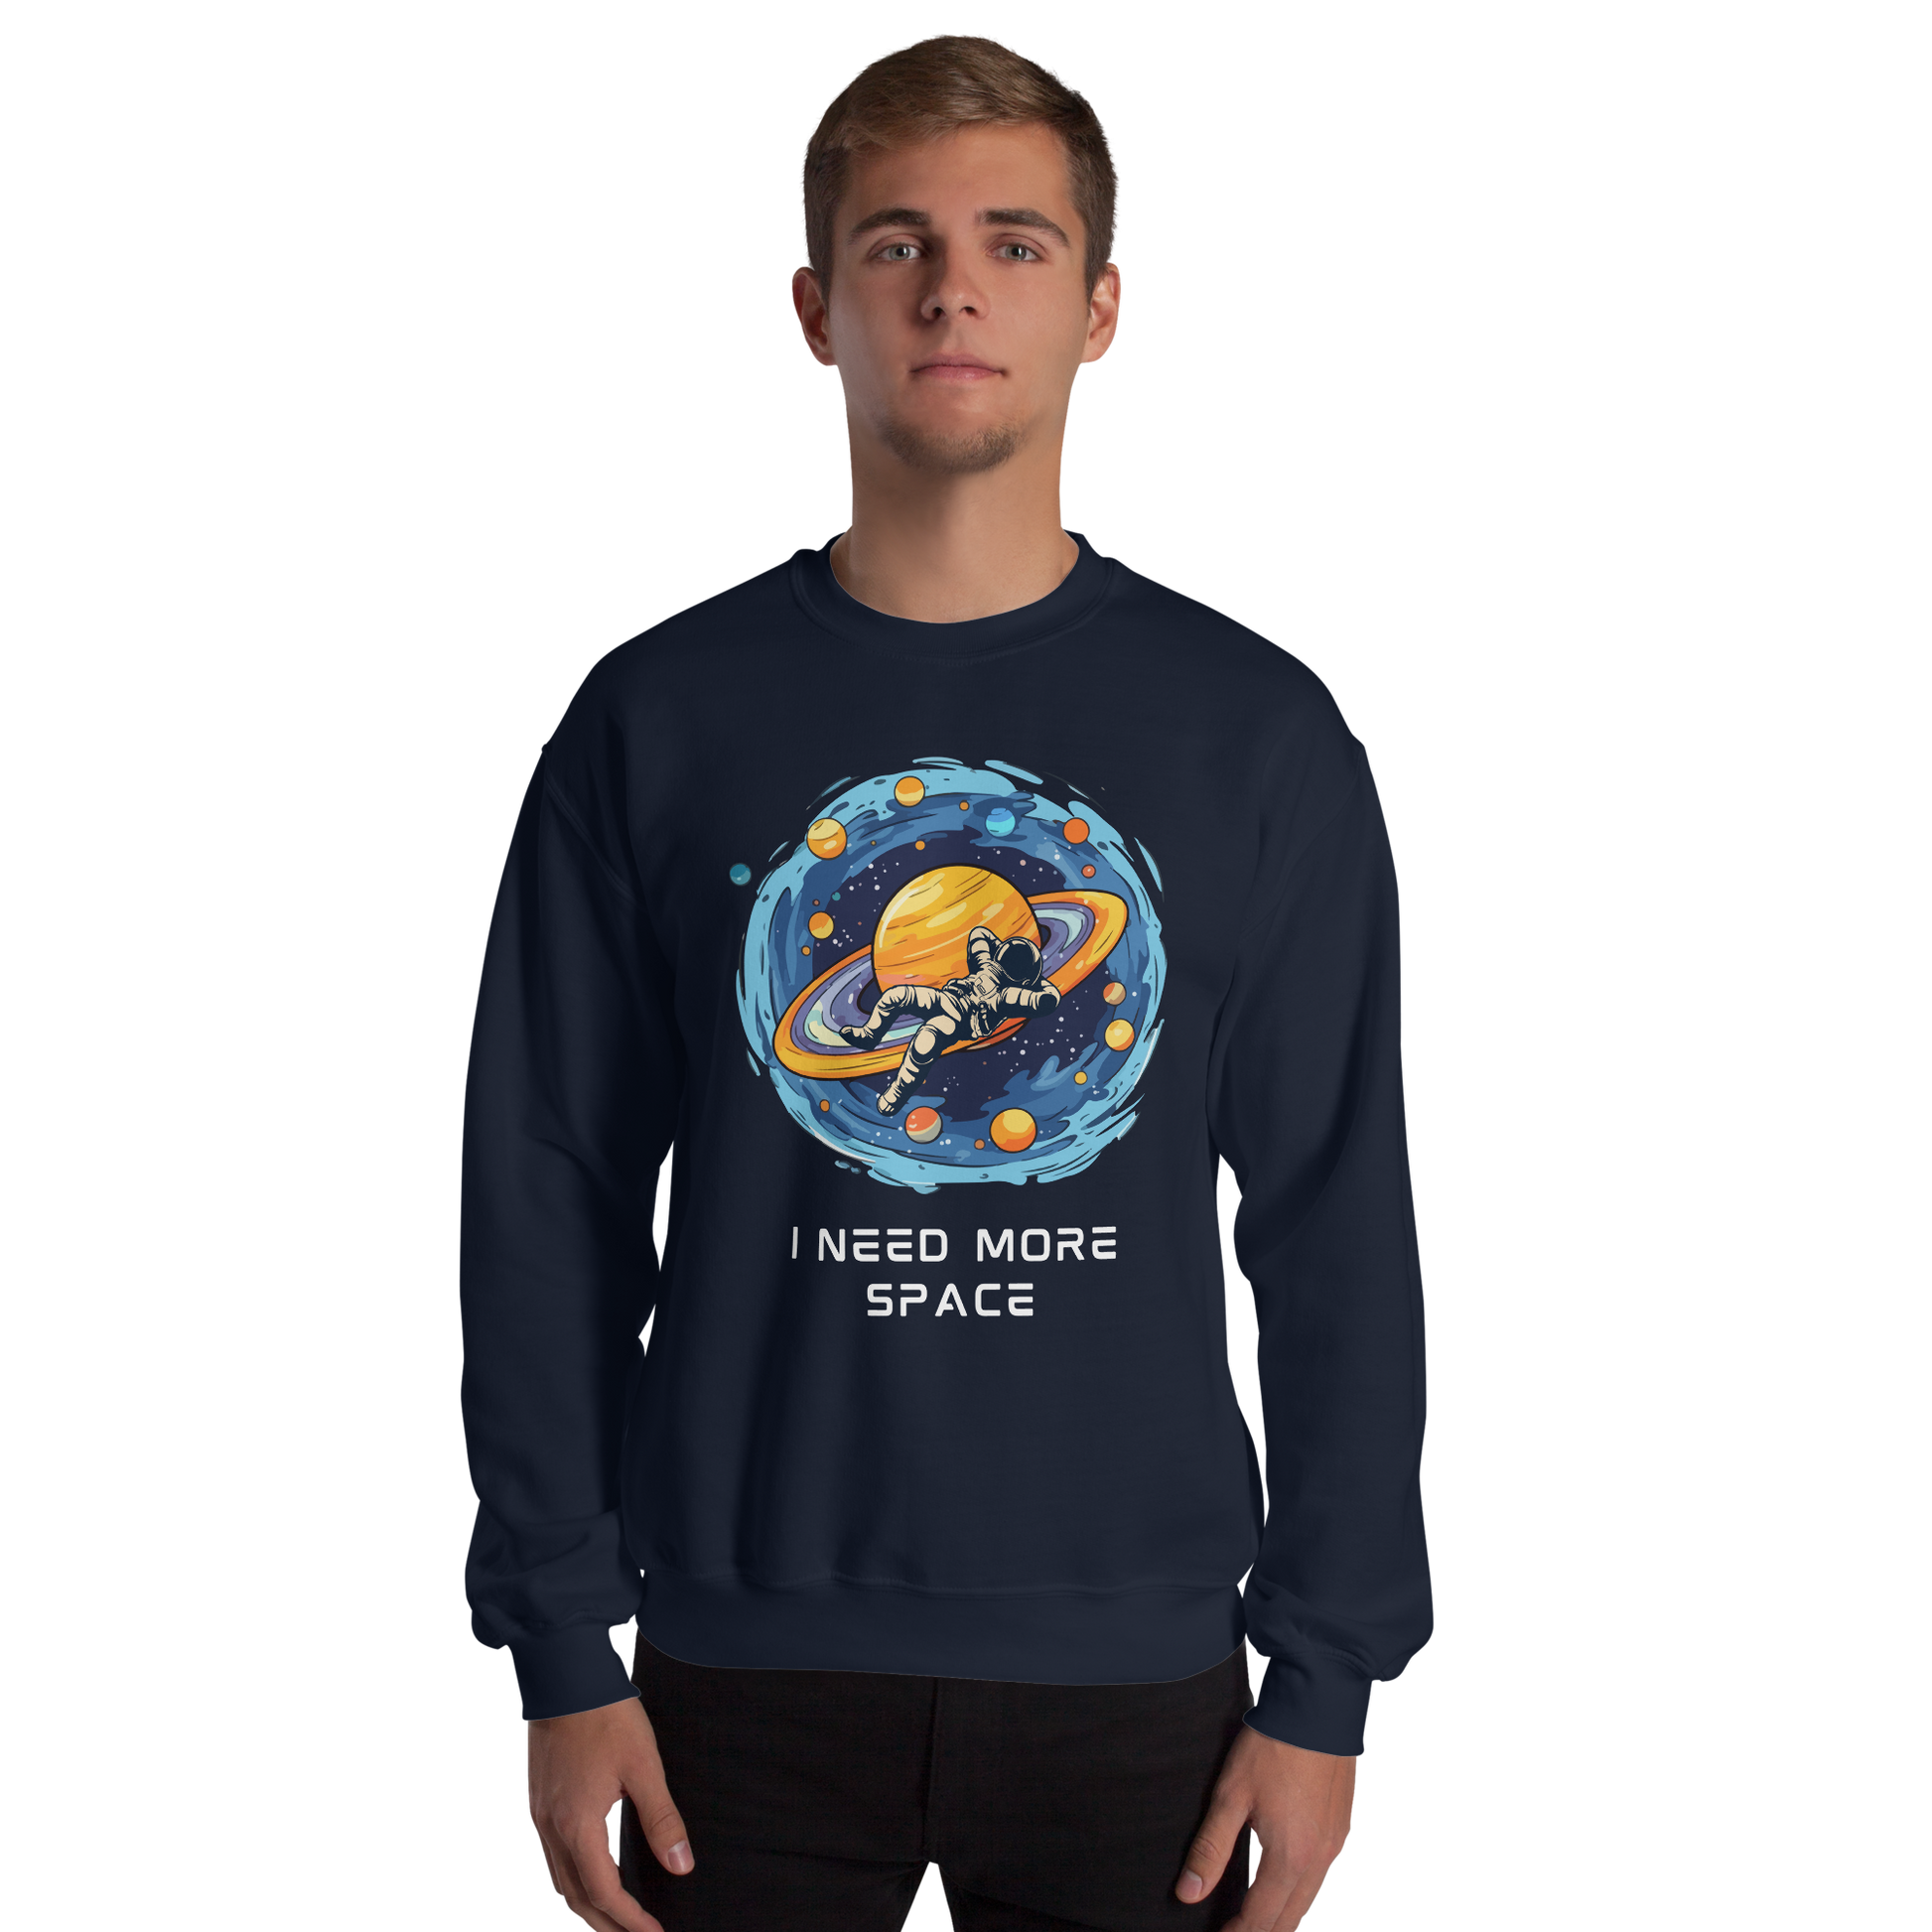 Man wearing a Navy Astronaut Sweatshirt featuring a captivating I Need More Space graphic on the chest - Funny Graphic Space Sweatshirts - Boozy Fox